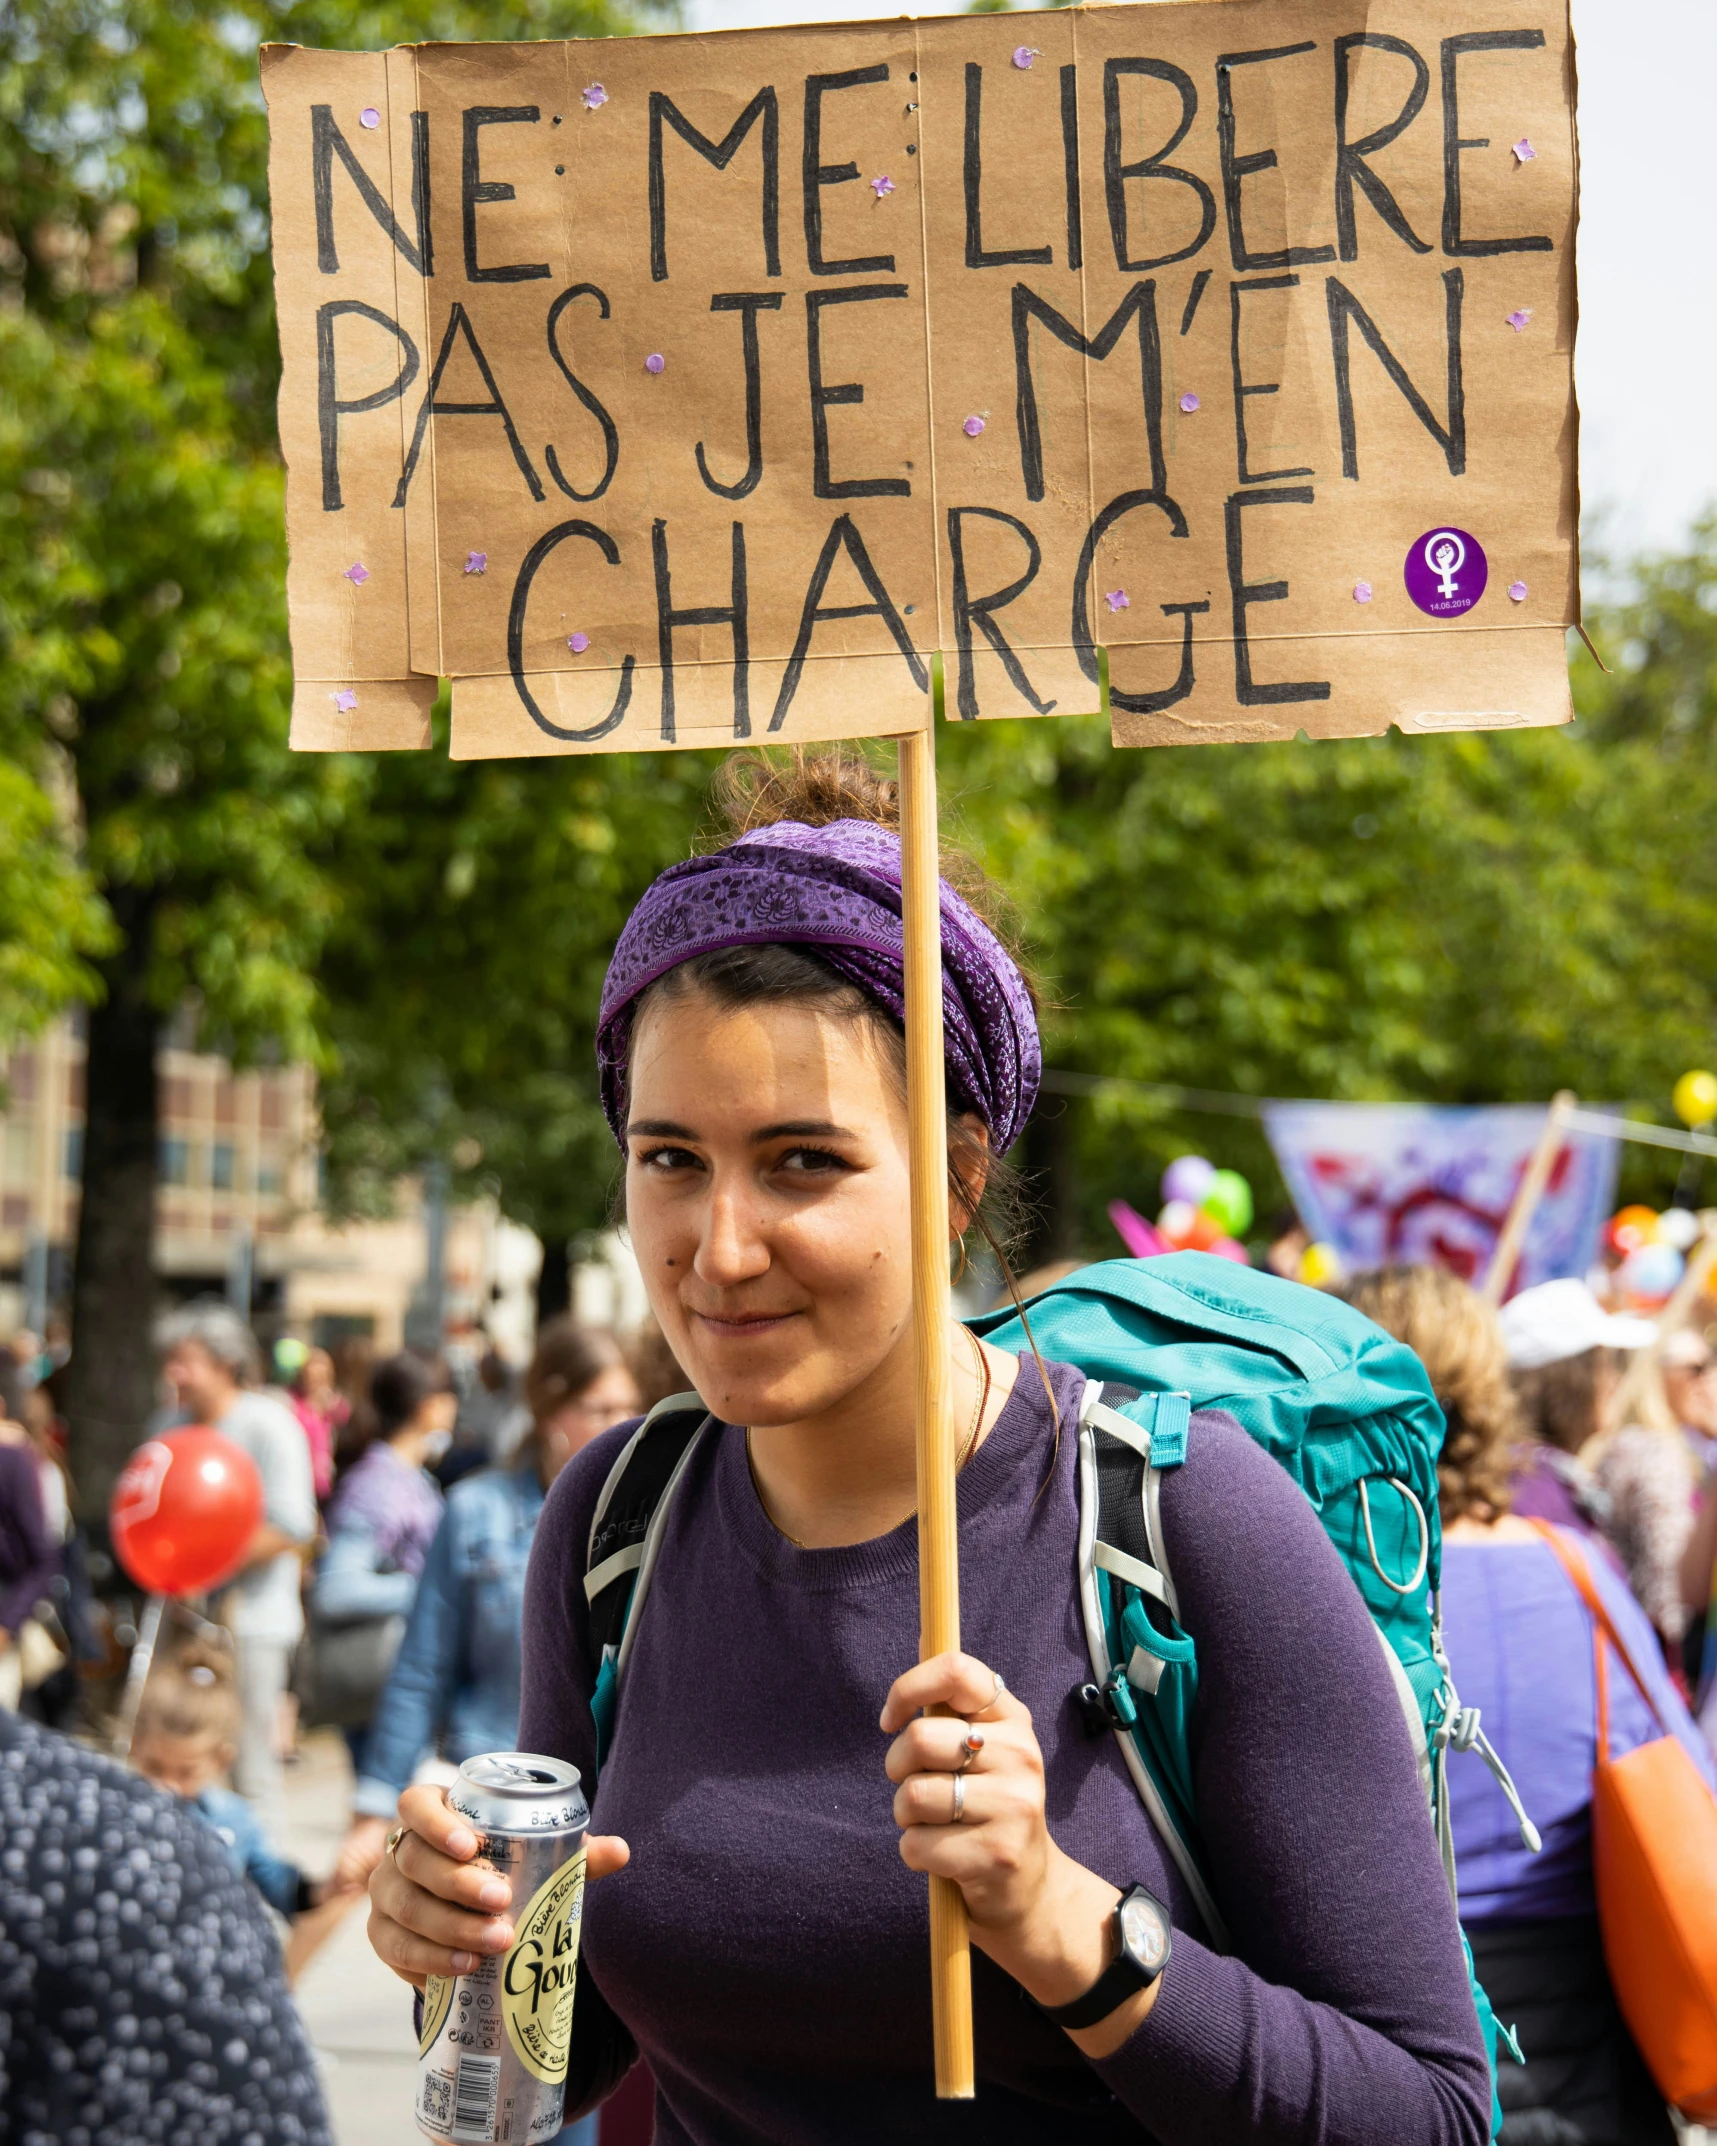 the woman has a sign that says, no mer libere pass te men charge